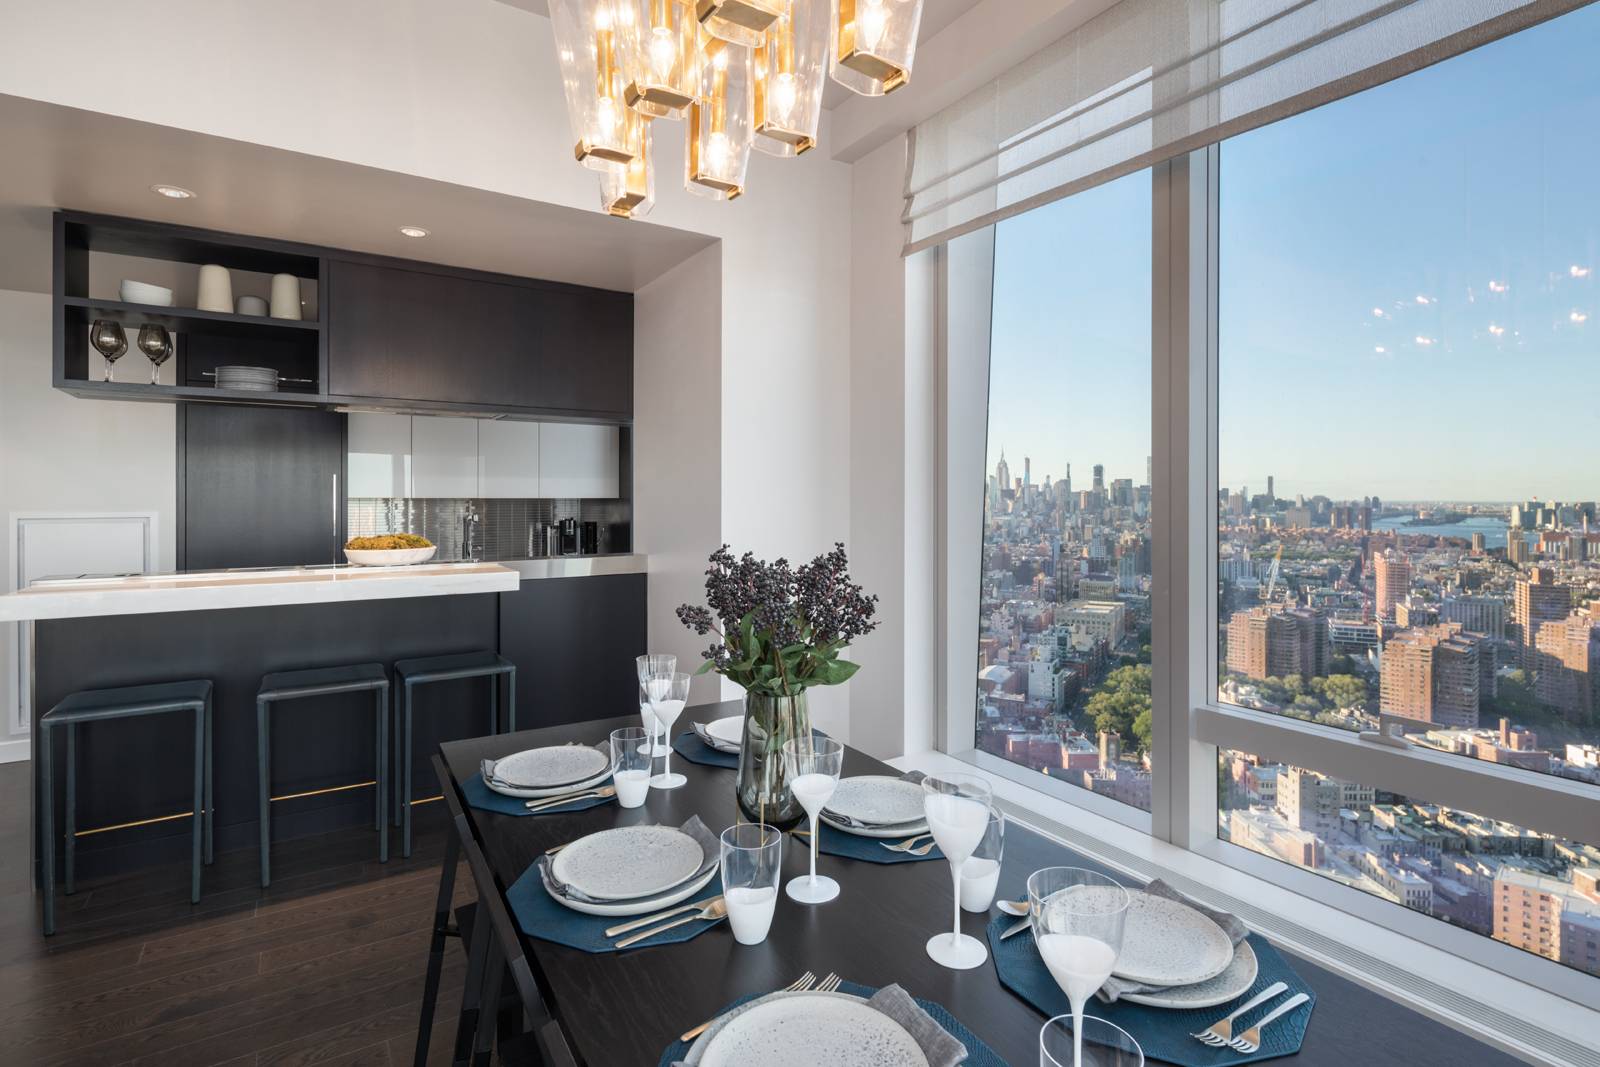 ONE MANHATTAN SQUARE OFFERS ONE OF THE LAST 20 YEAR TAX ABATEMENTS AVAILABLE IN NEW YORK CITY Residence 10H is a 1156 square foot two bedroom, two bathroom, with an ...